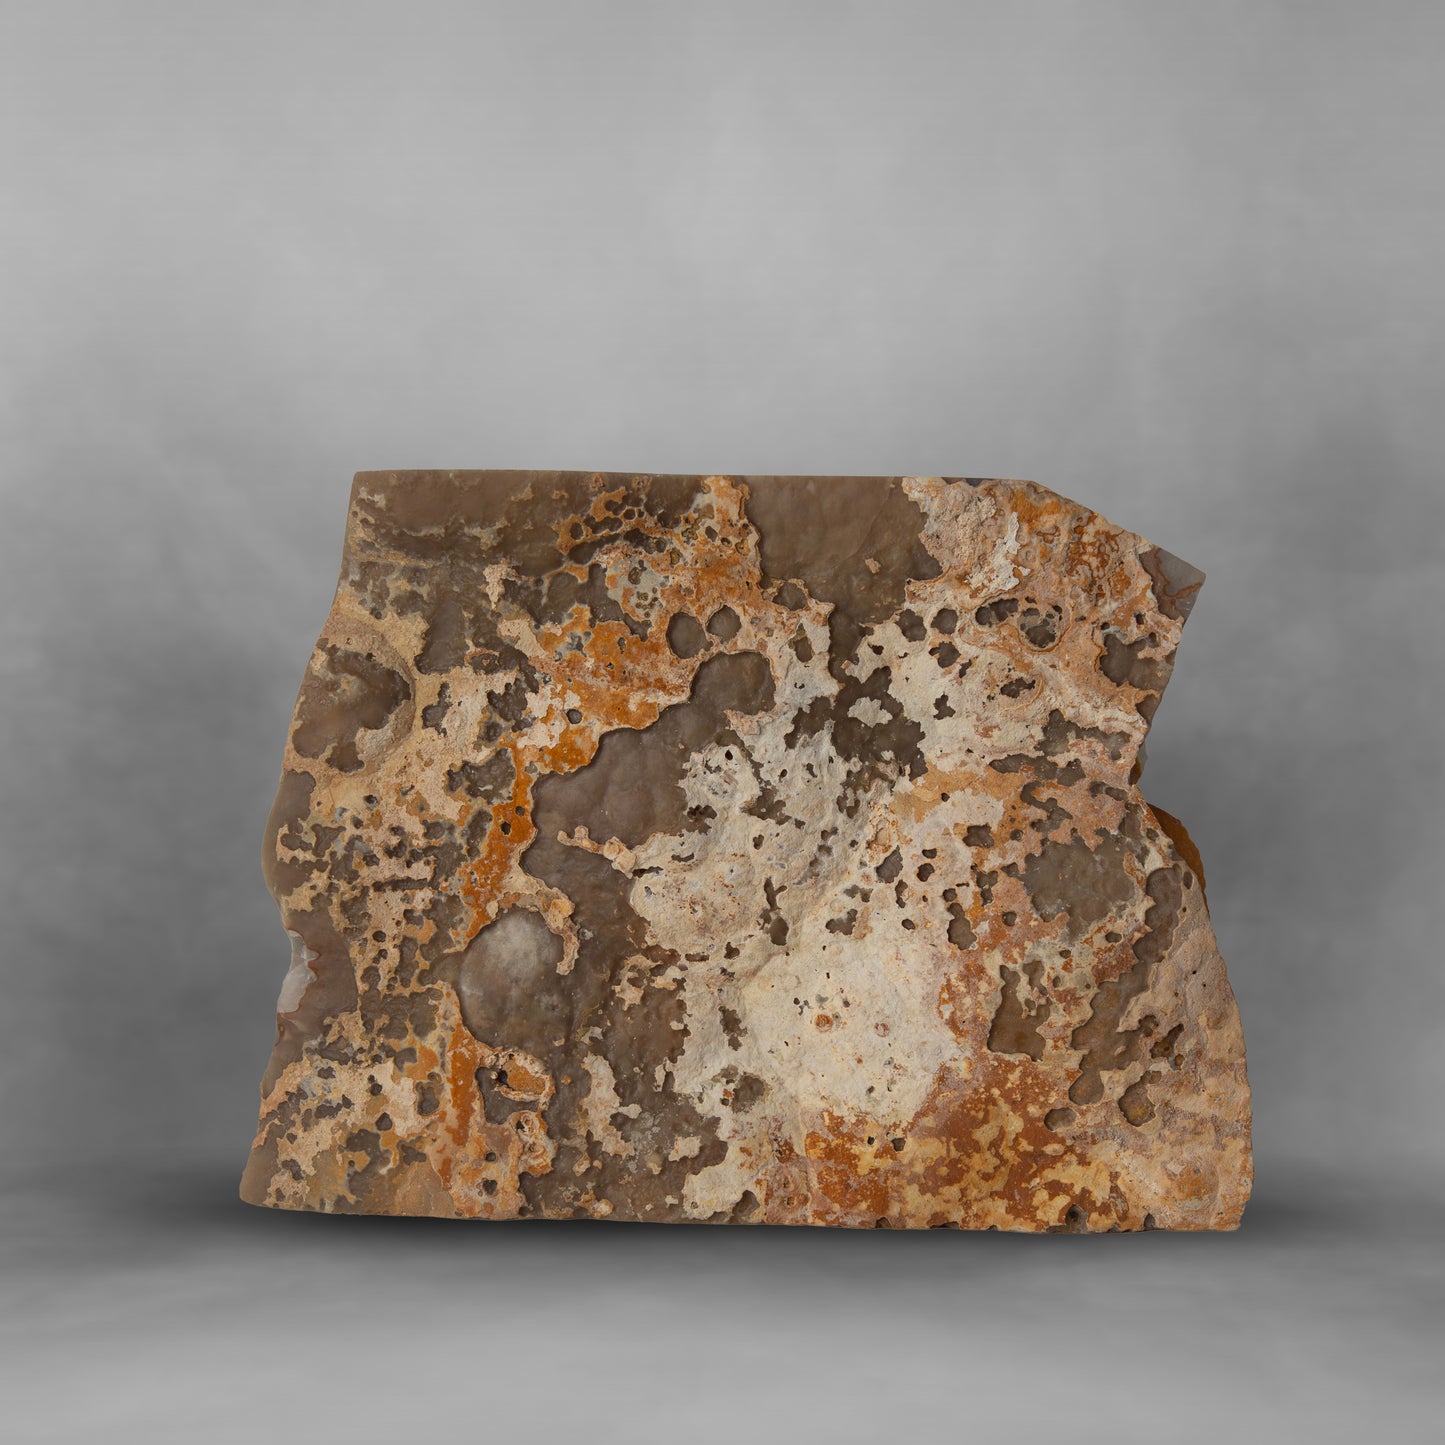 Amazing decorative onyx rock, two sides, dry lava and rock with mineral